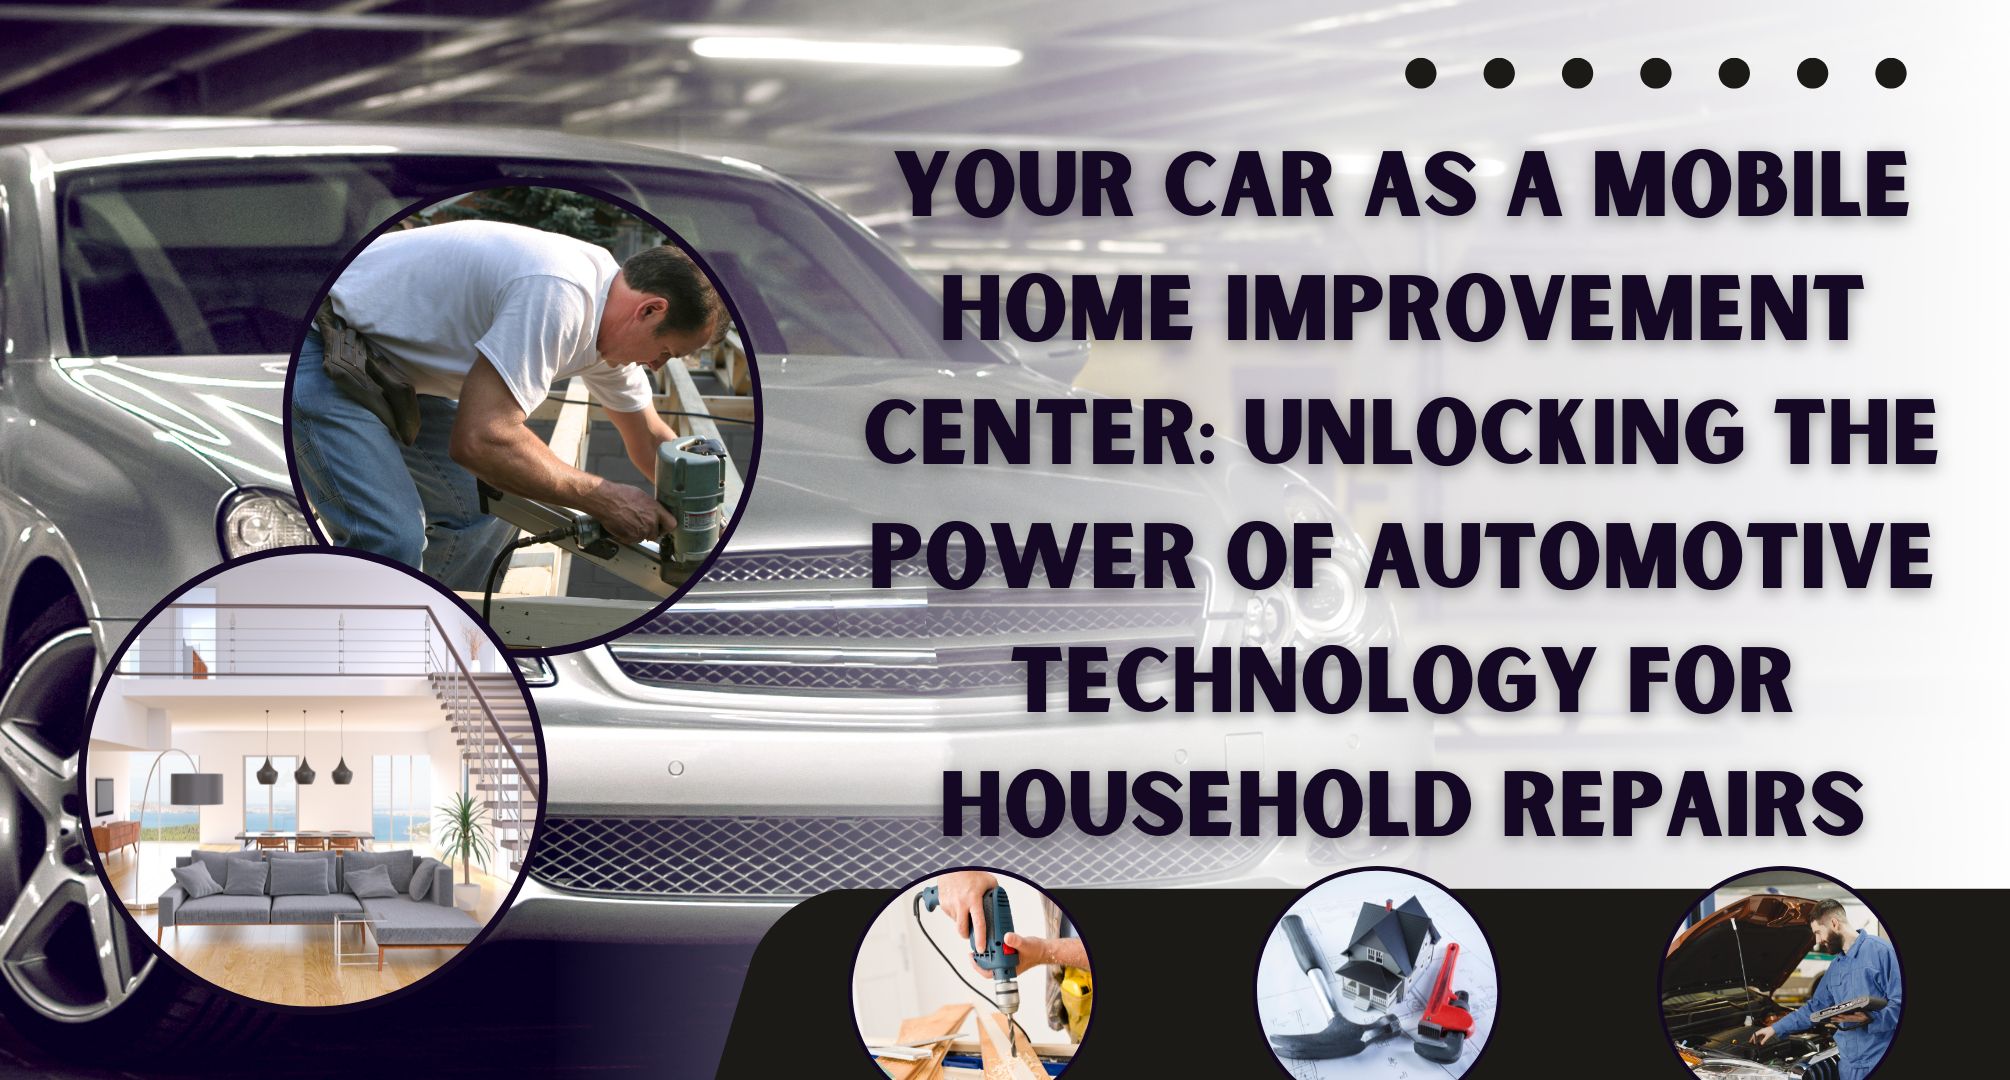 Your Car as a Mobile Home Improvement Center: Unlocking the Power of Automotive Technology for Household Repairs